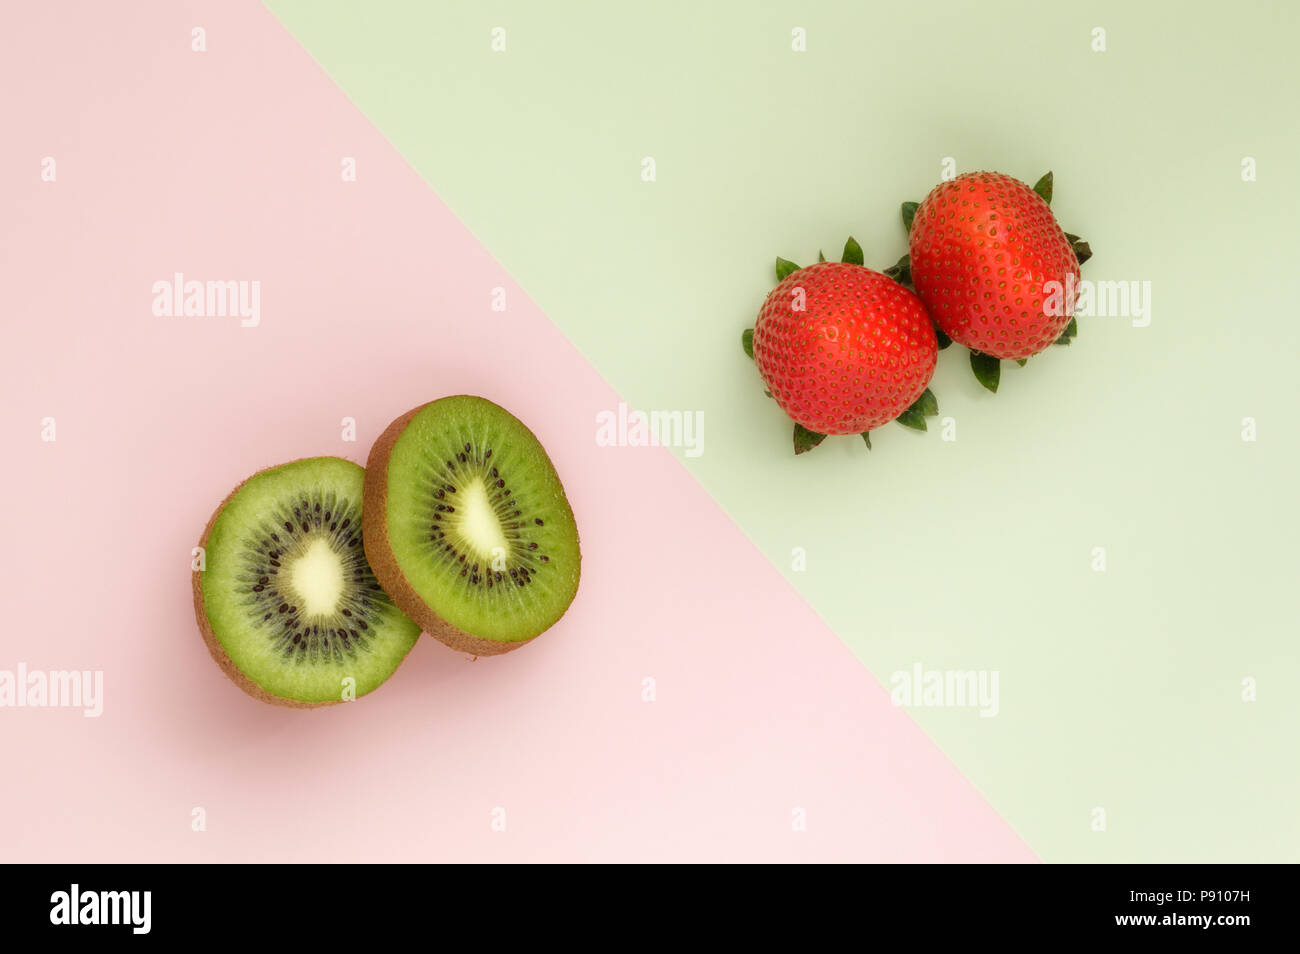 Two Kiwi half's and two Strawberries on duo colored background Stock Photo